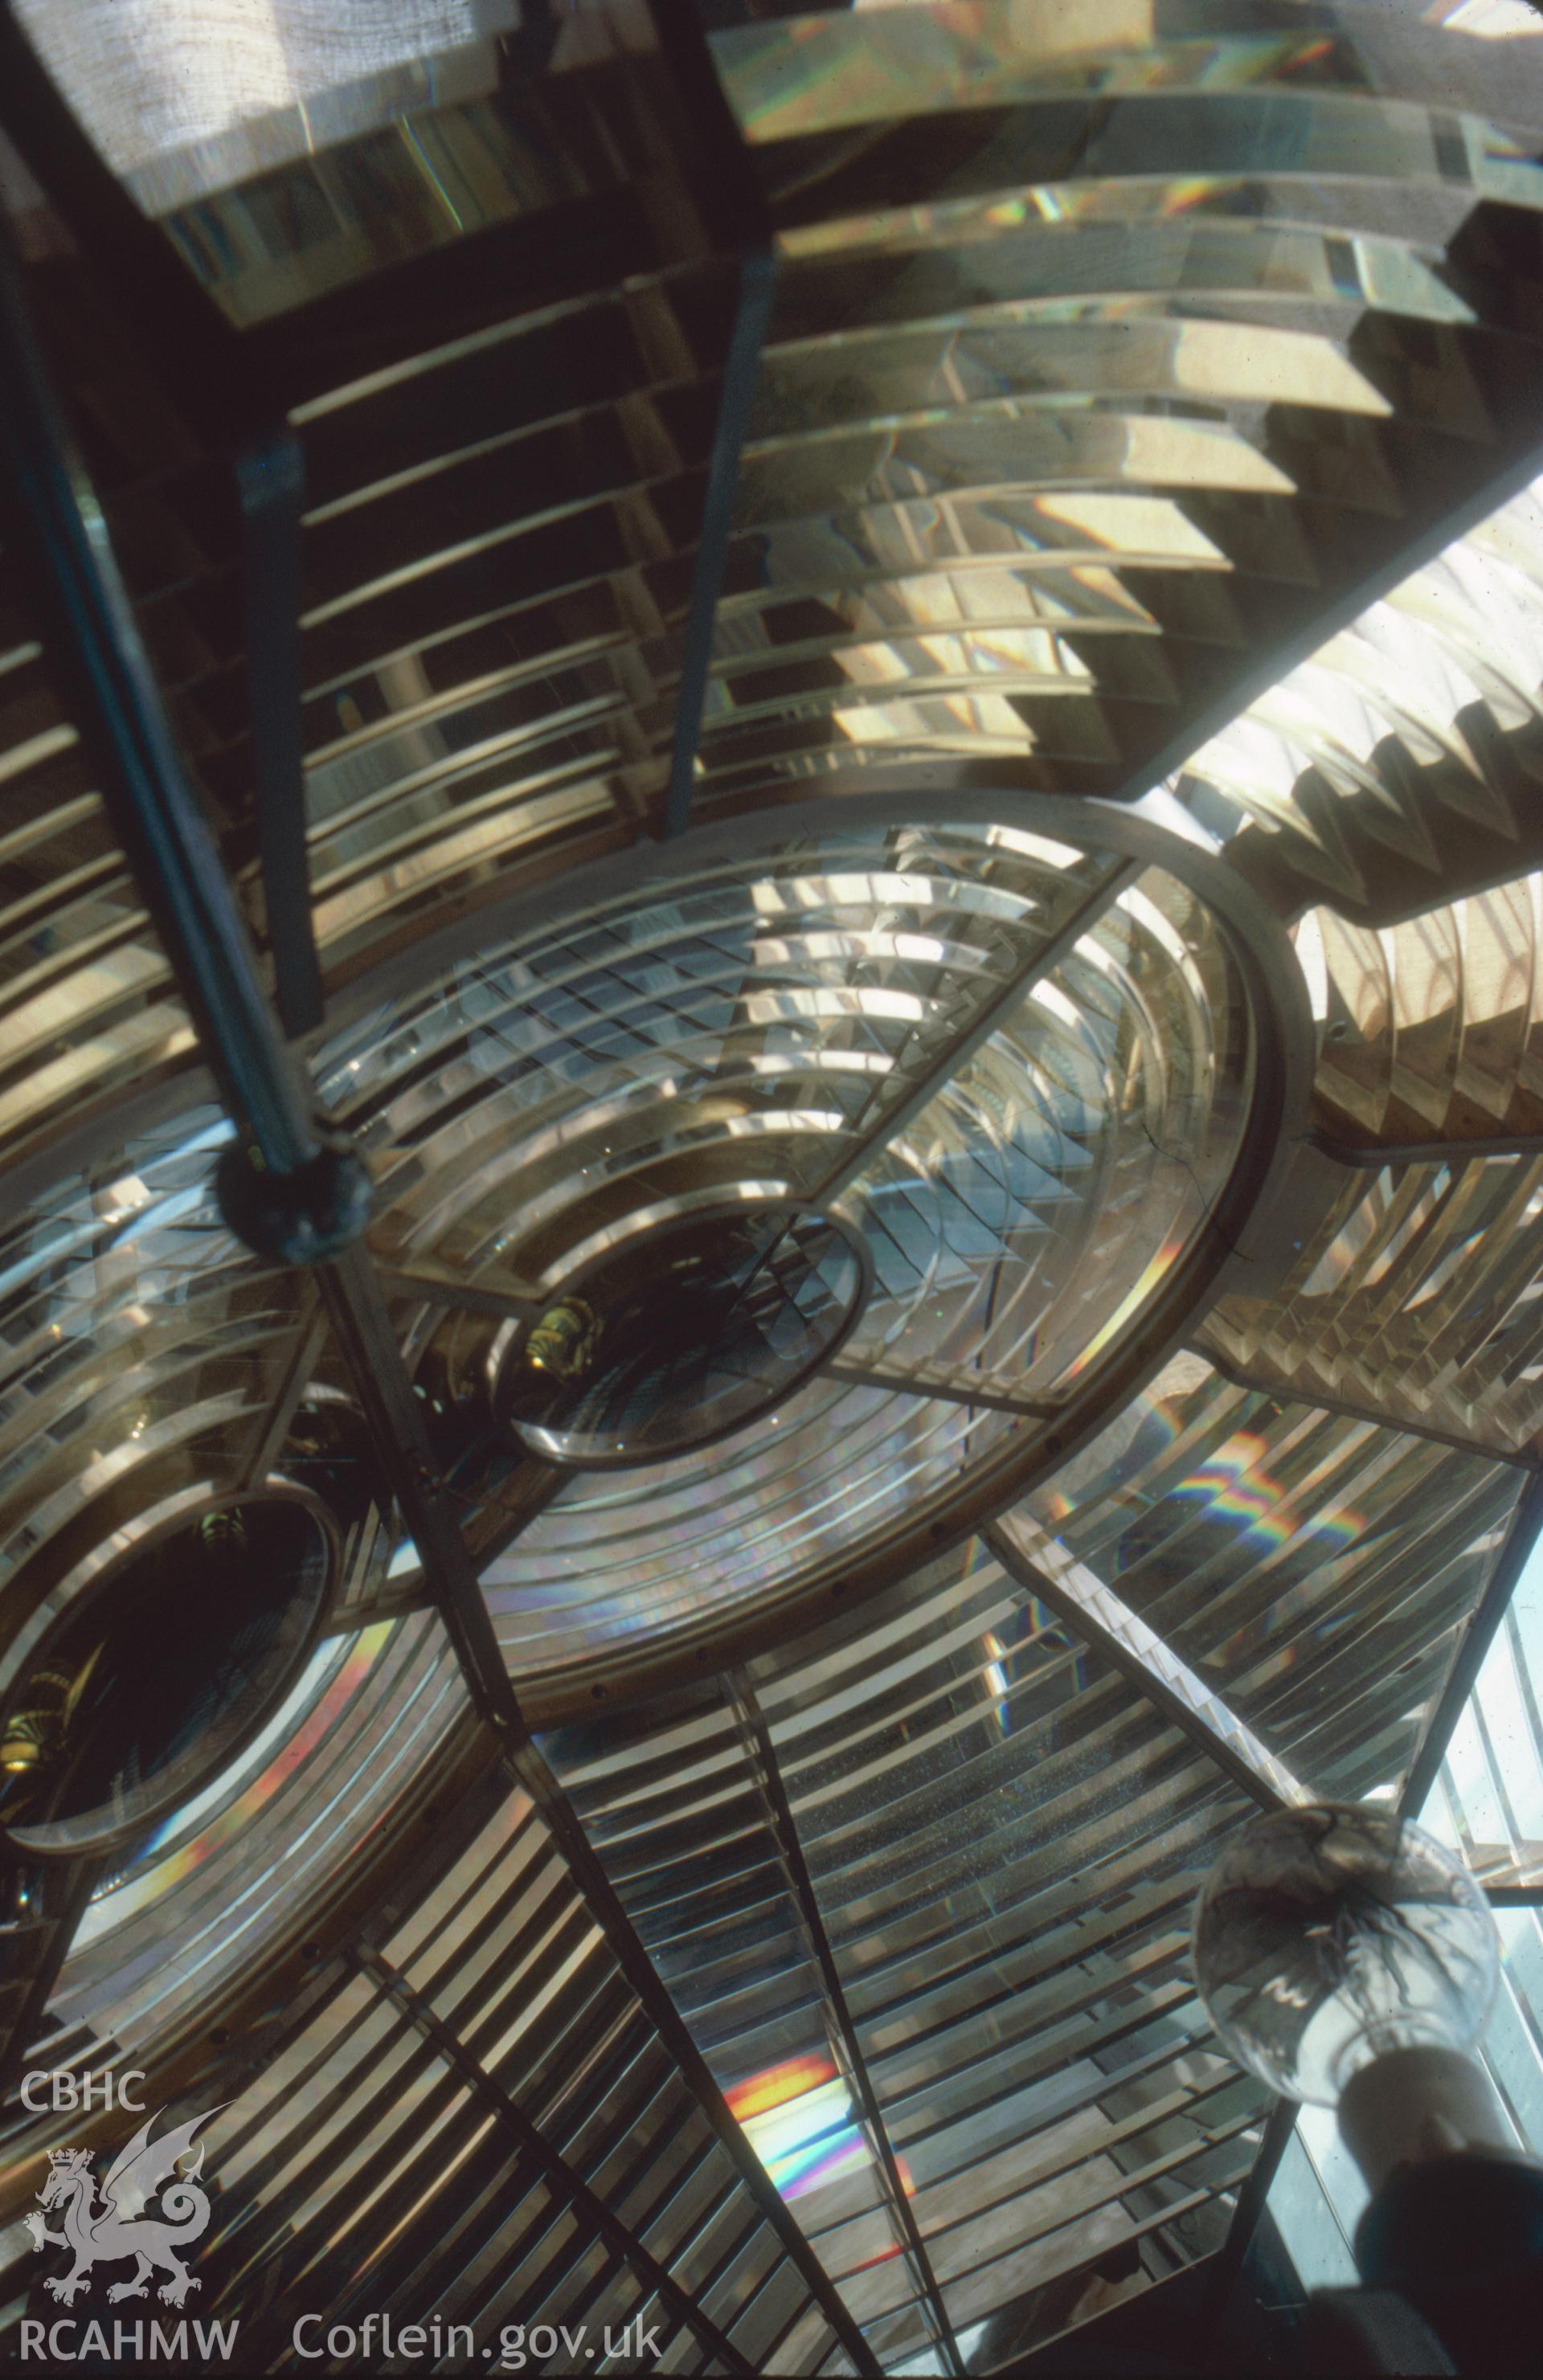 Colour slide, interior view showing lantern optic in the lighthouse.